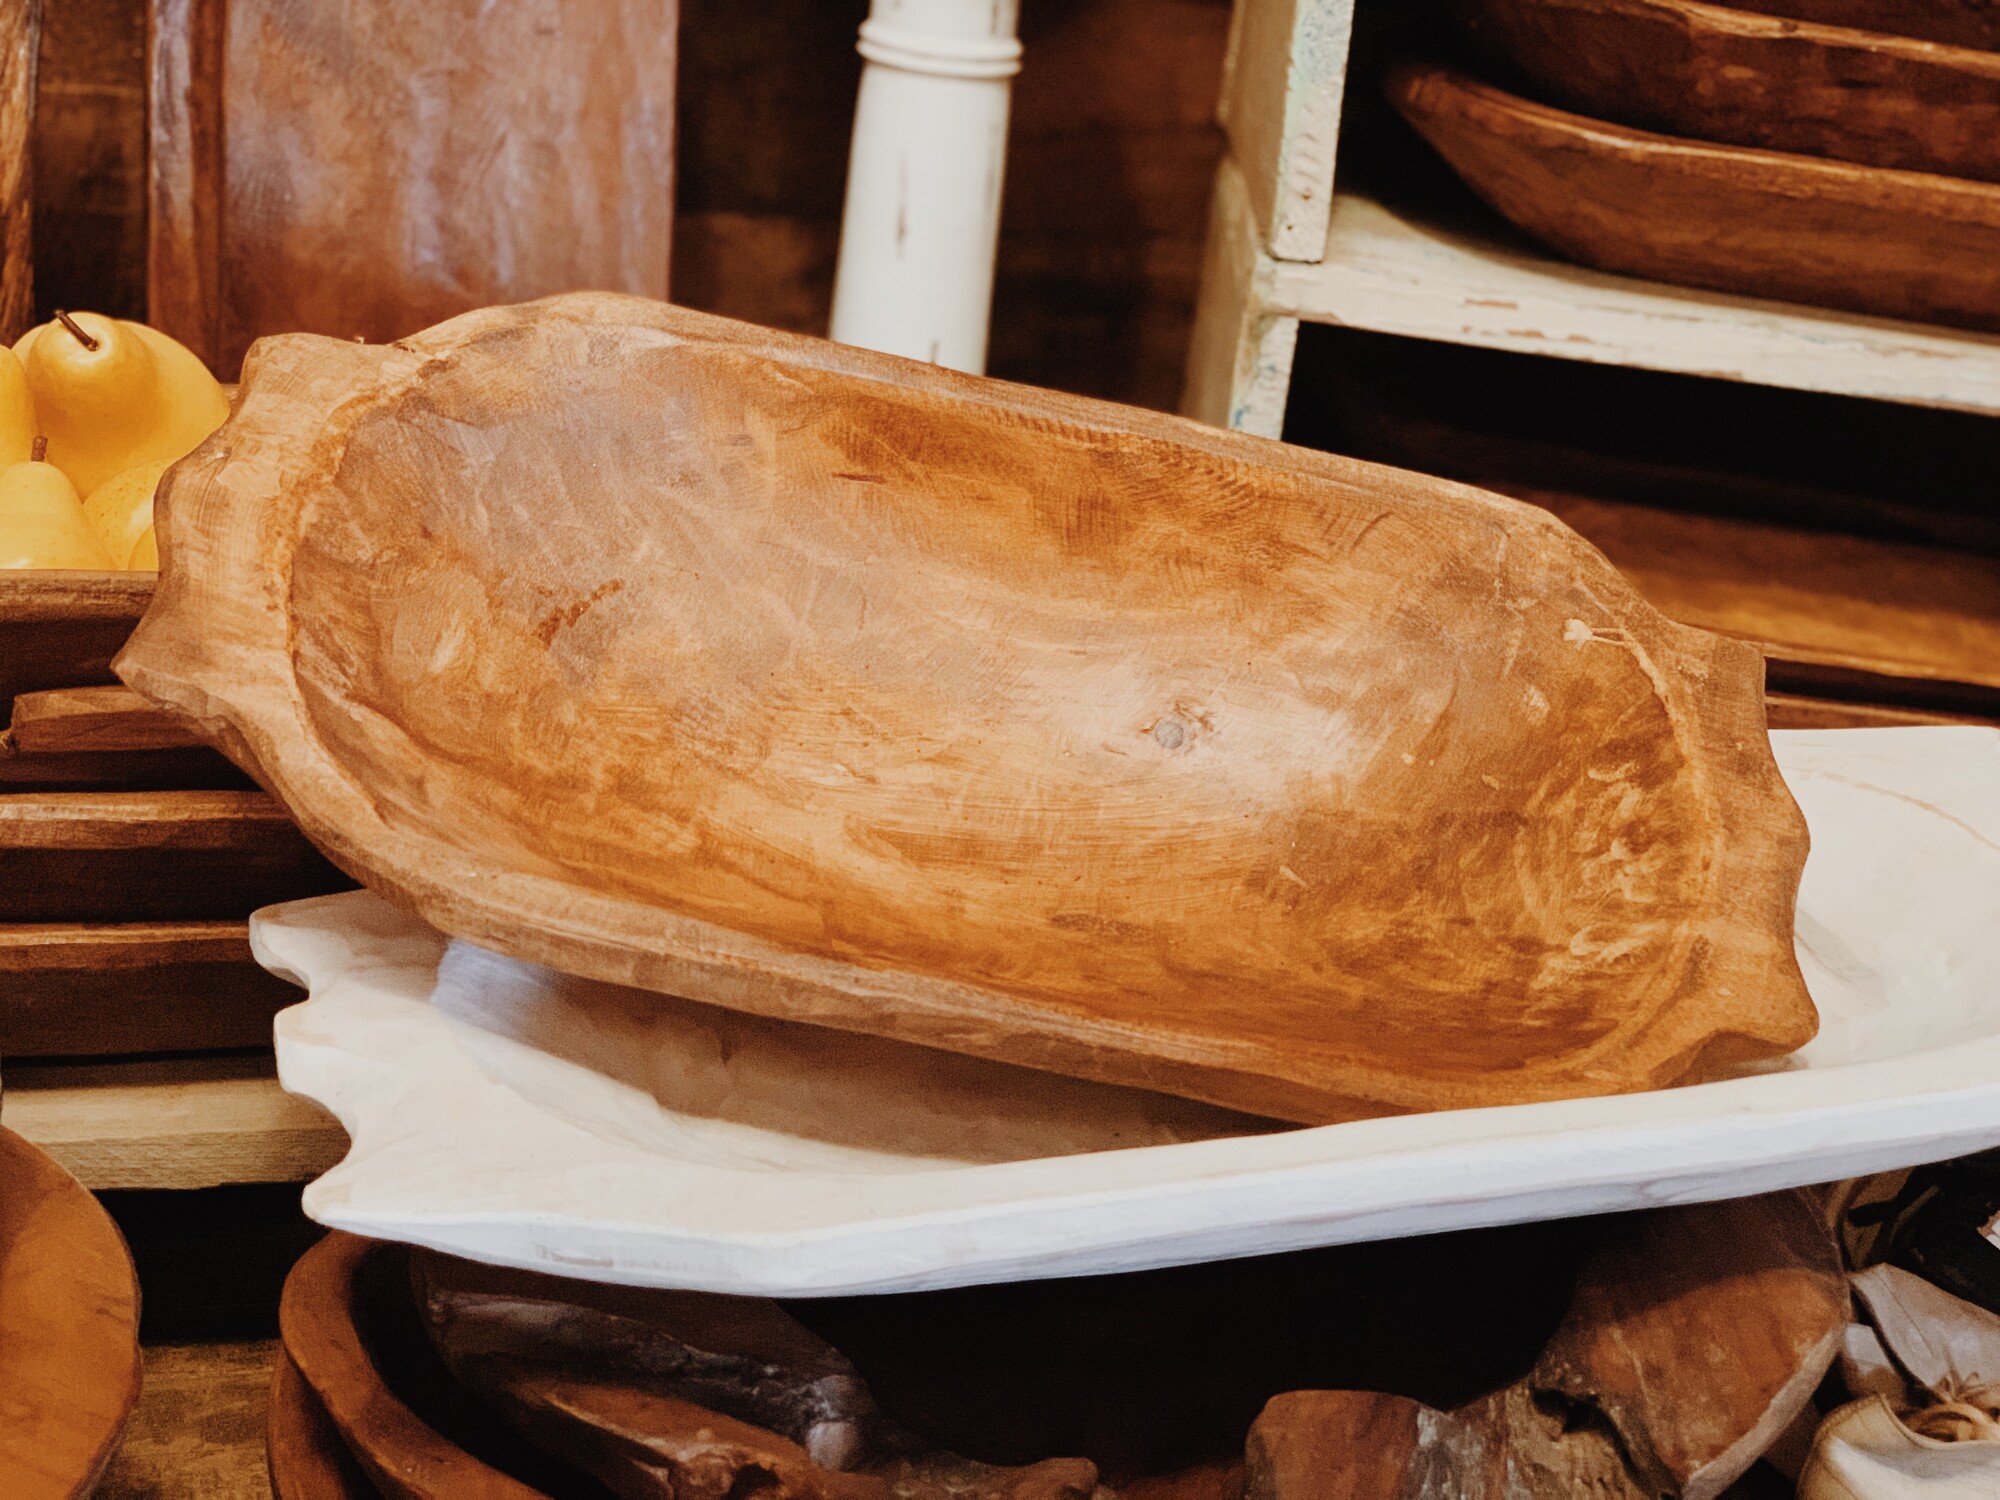 Fabulous Dough Bowls: Where to Find Them & How to Style Them